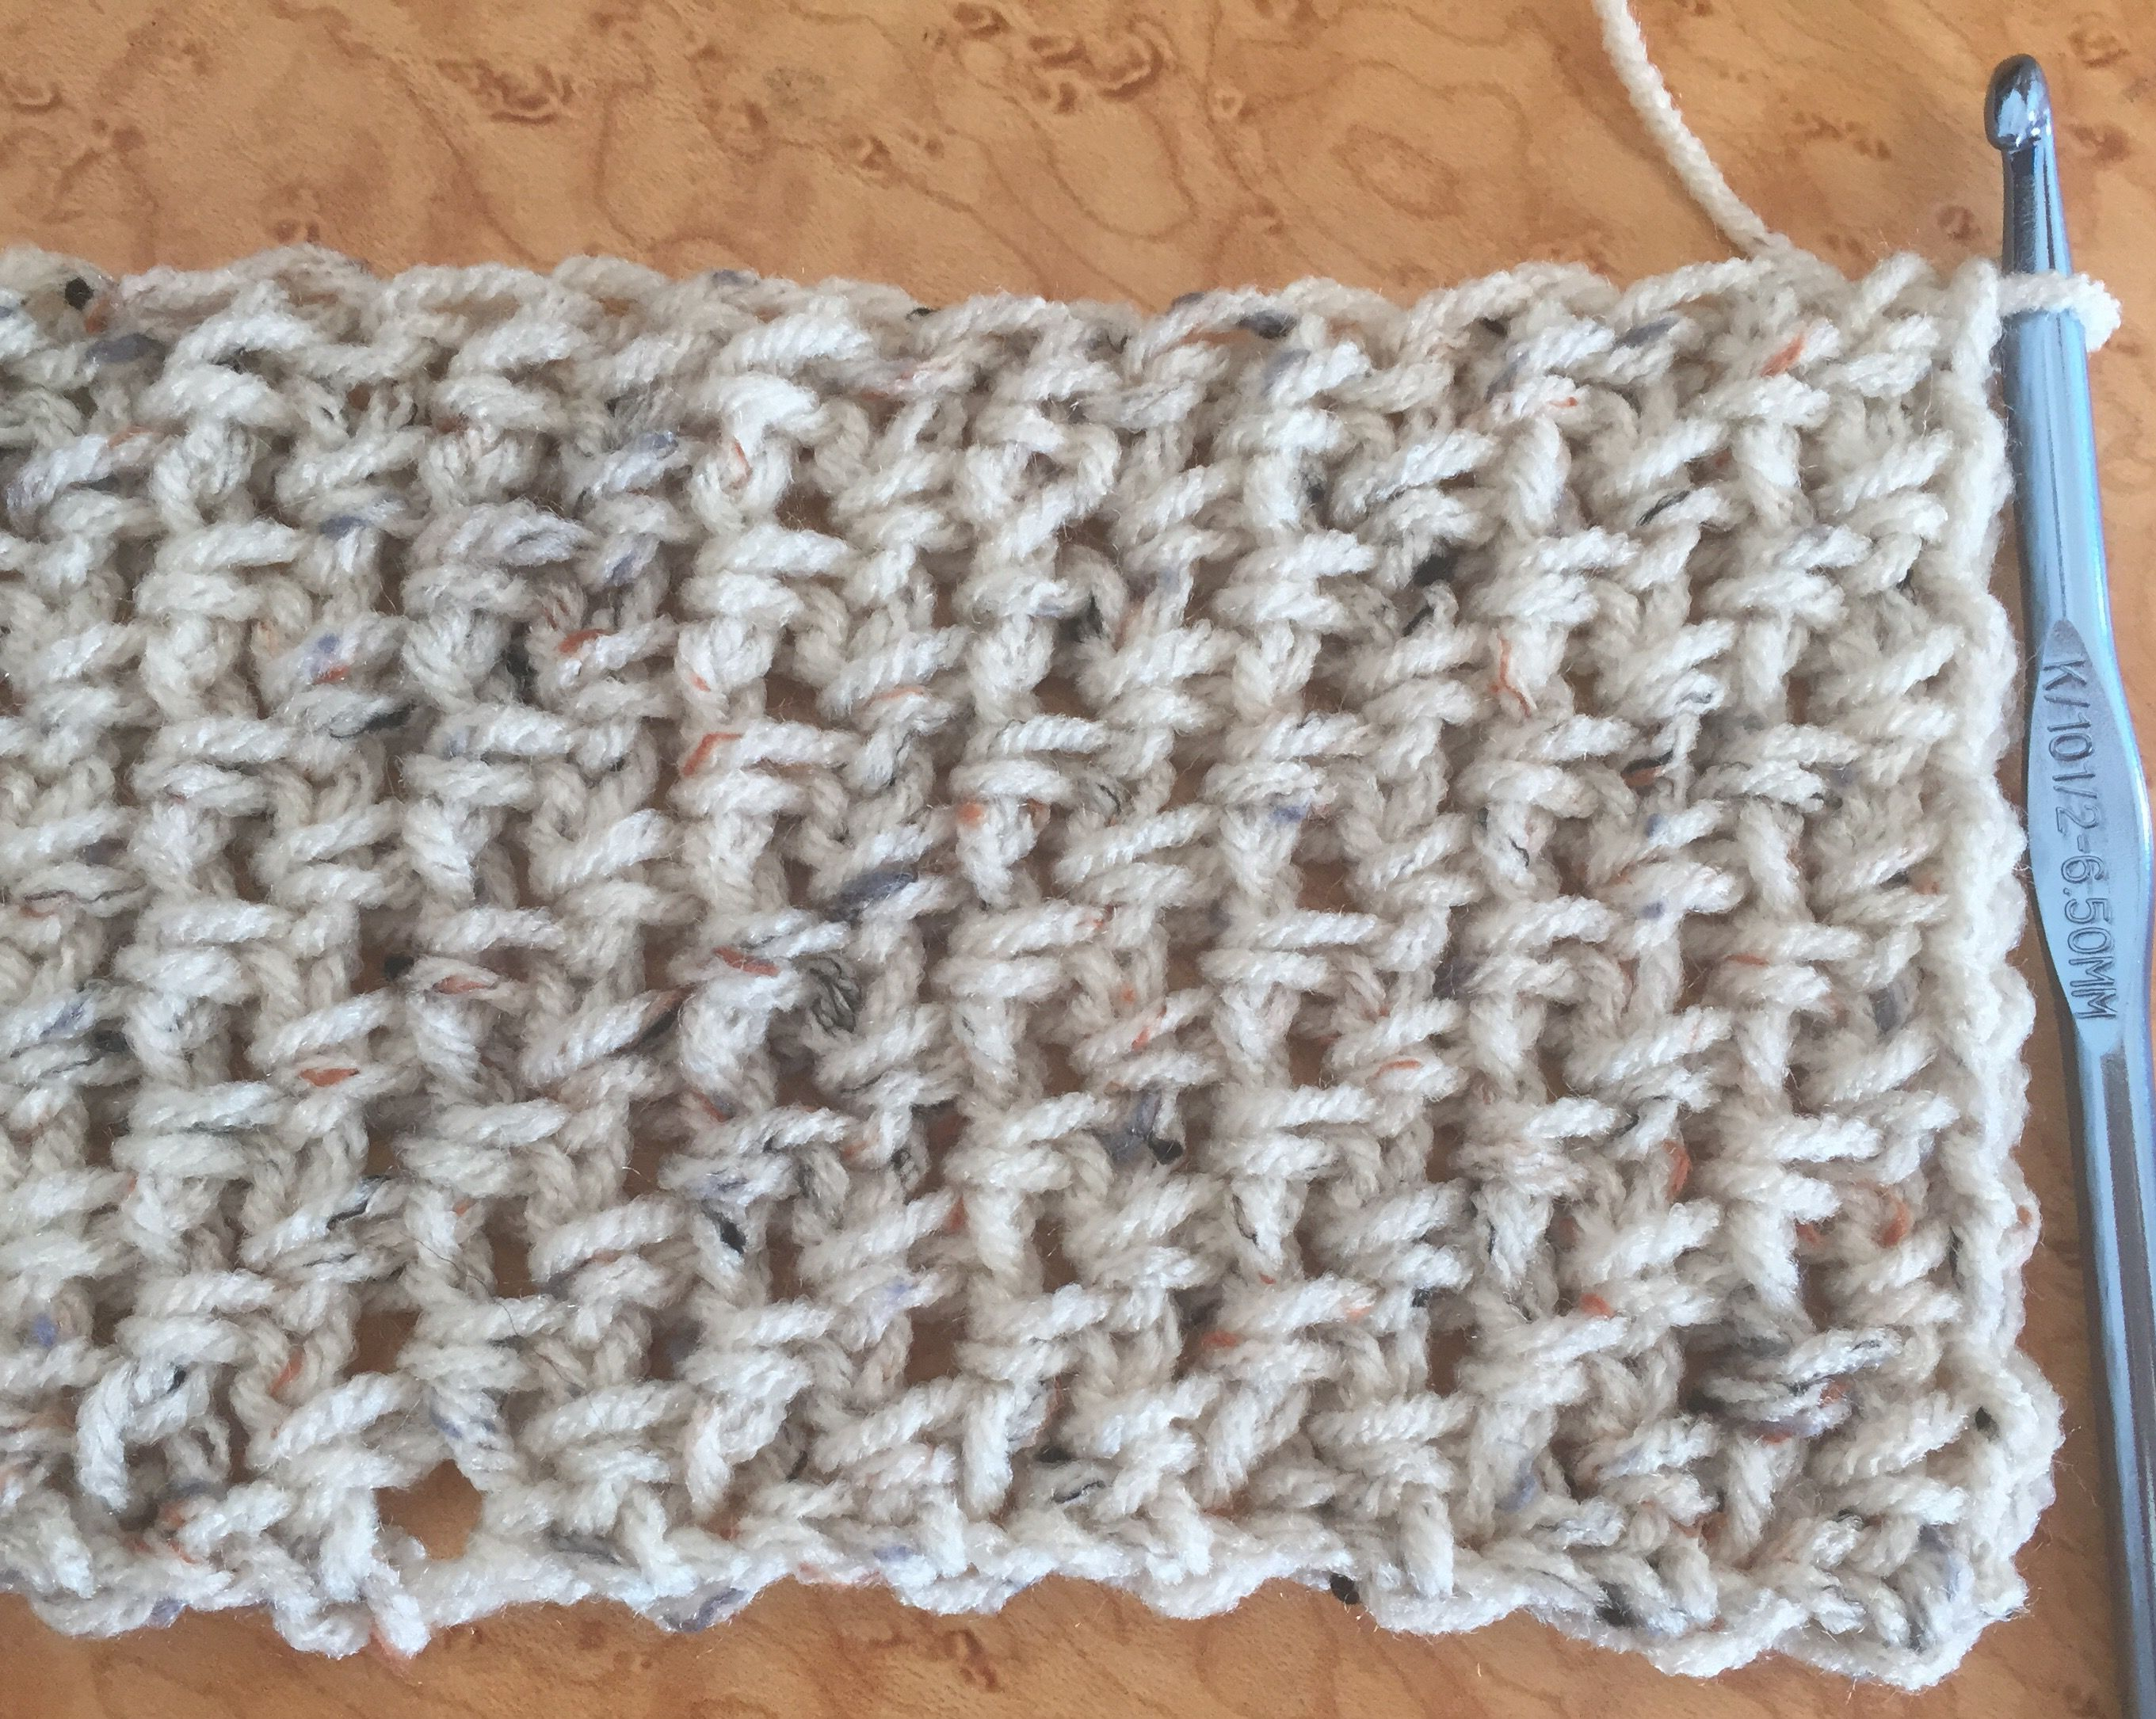 Knitting Scarf Pattern For Beginners Free Easy Crochet Scarf Free Pattern Using Moss Stitch